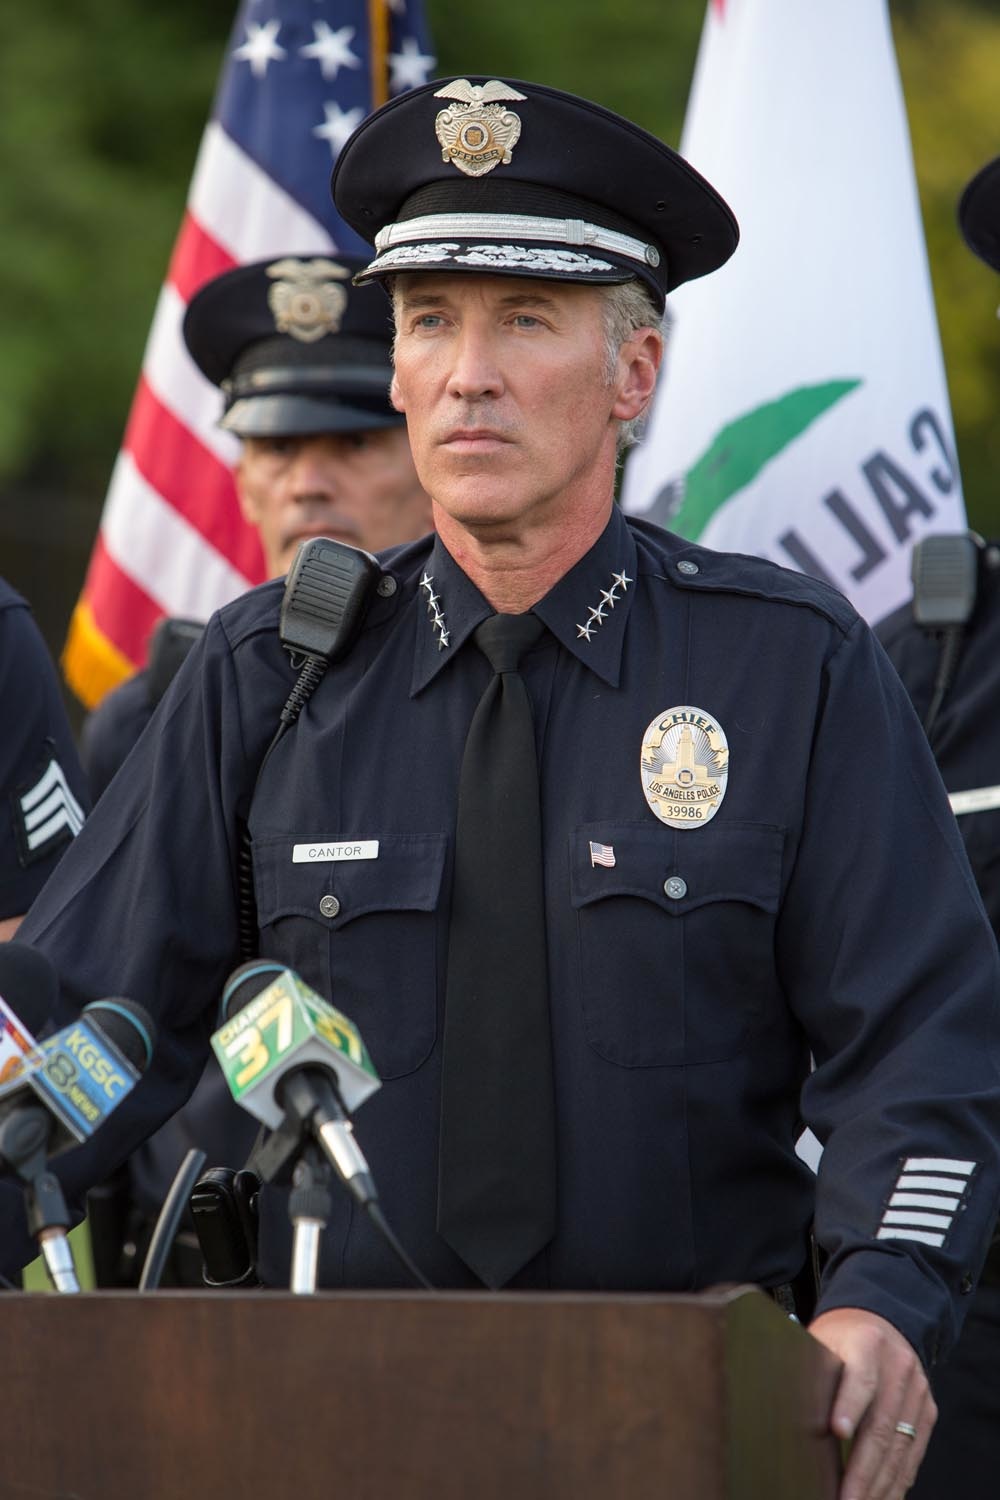 Actor Fred Galle as LA Police Chief Cantor in the hit movie Lets Be Cops for 20th Century Fox Studios and Genre Films Directed by Luke Greenfield